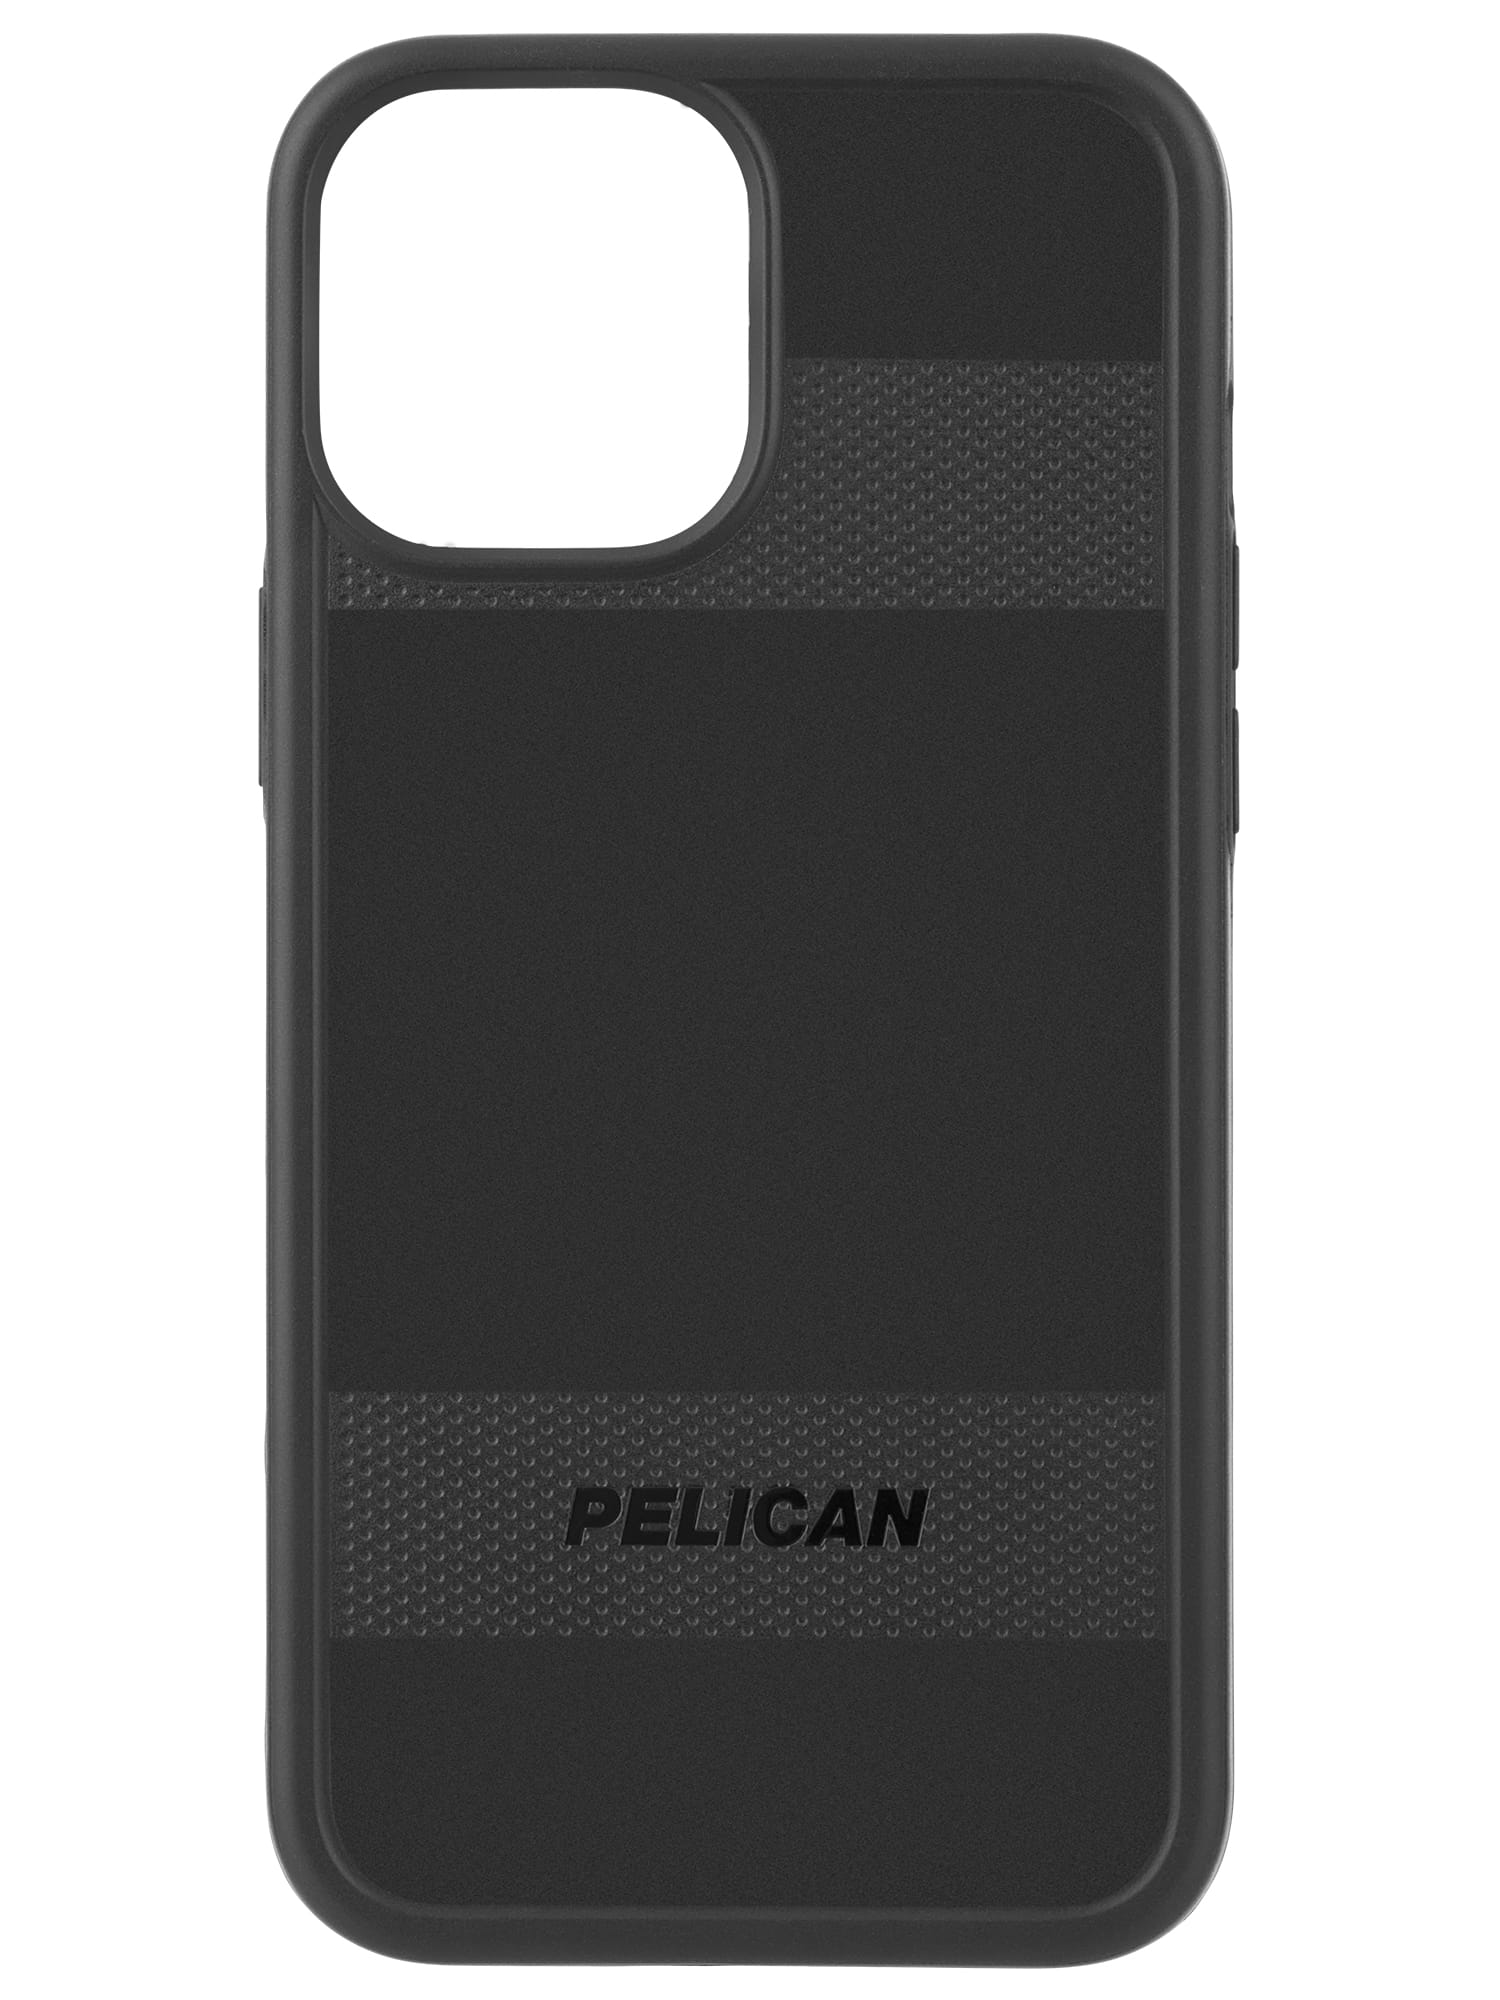 Pelican MagSafe Protector iPhone 13 case giveaway: Protect your iPhone 13 with a case from Pelican.